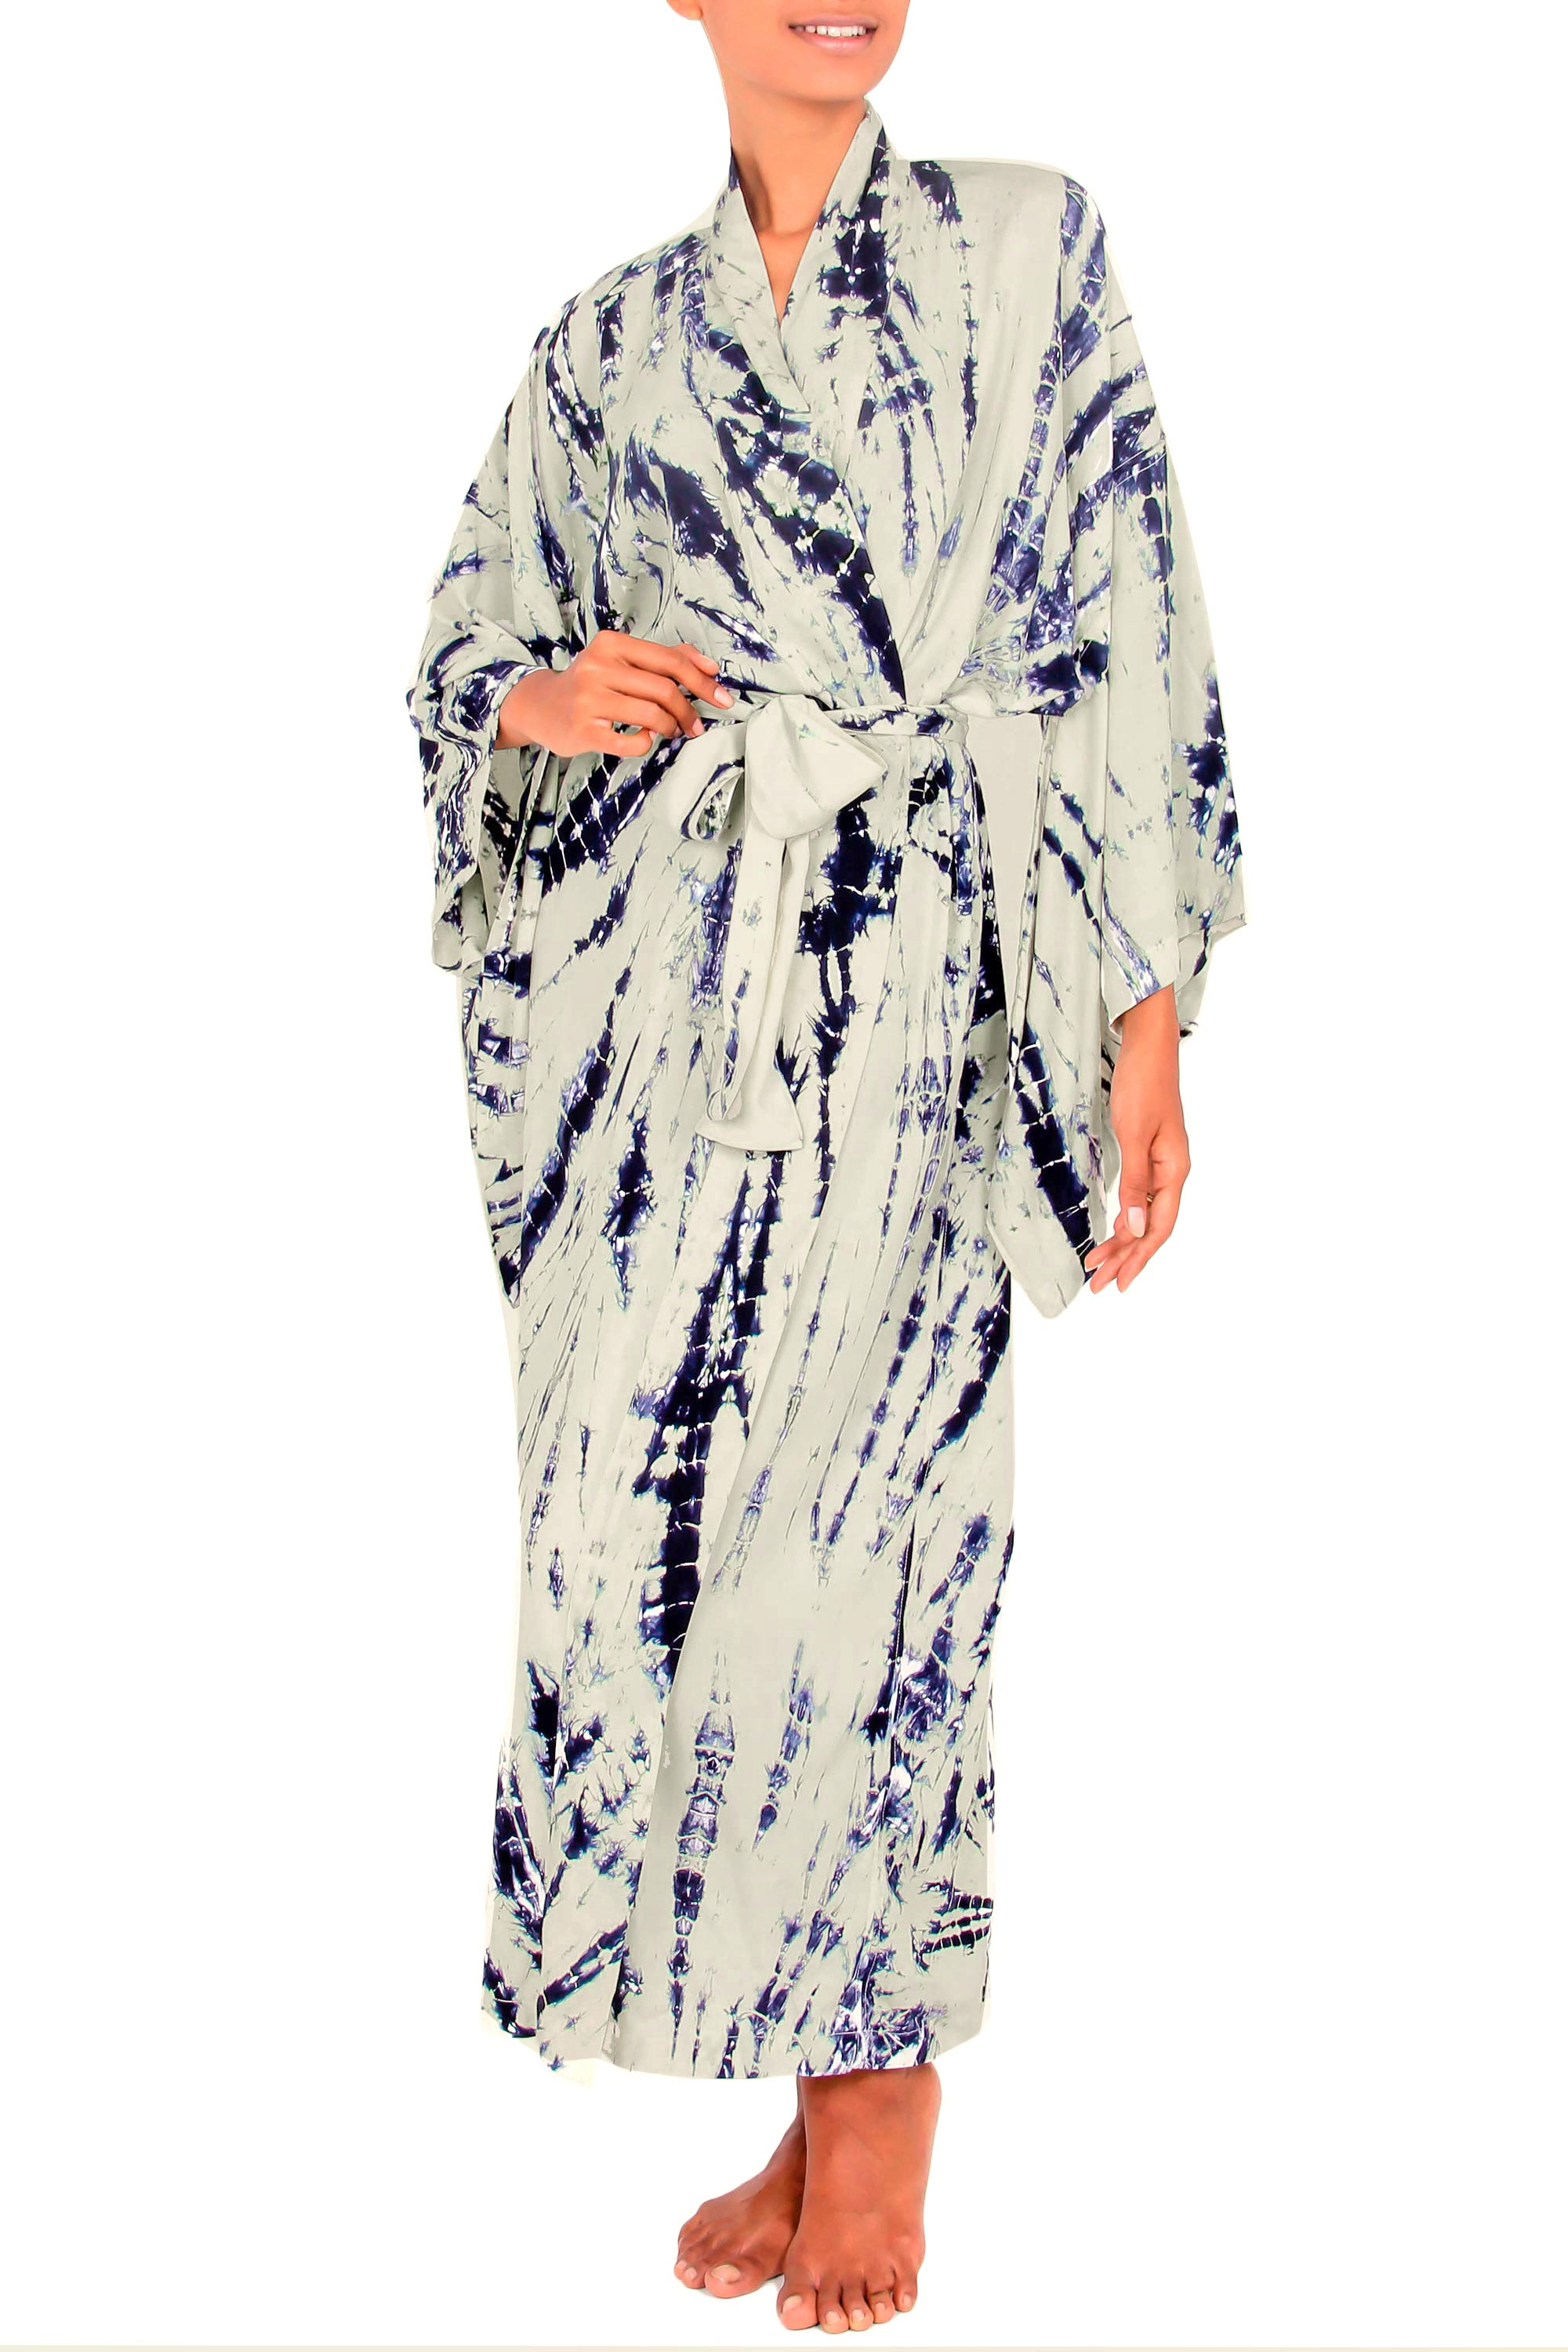 Fill Your Closet With Casual Yukata-Style Robes Designed To Keep